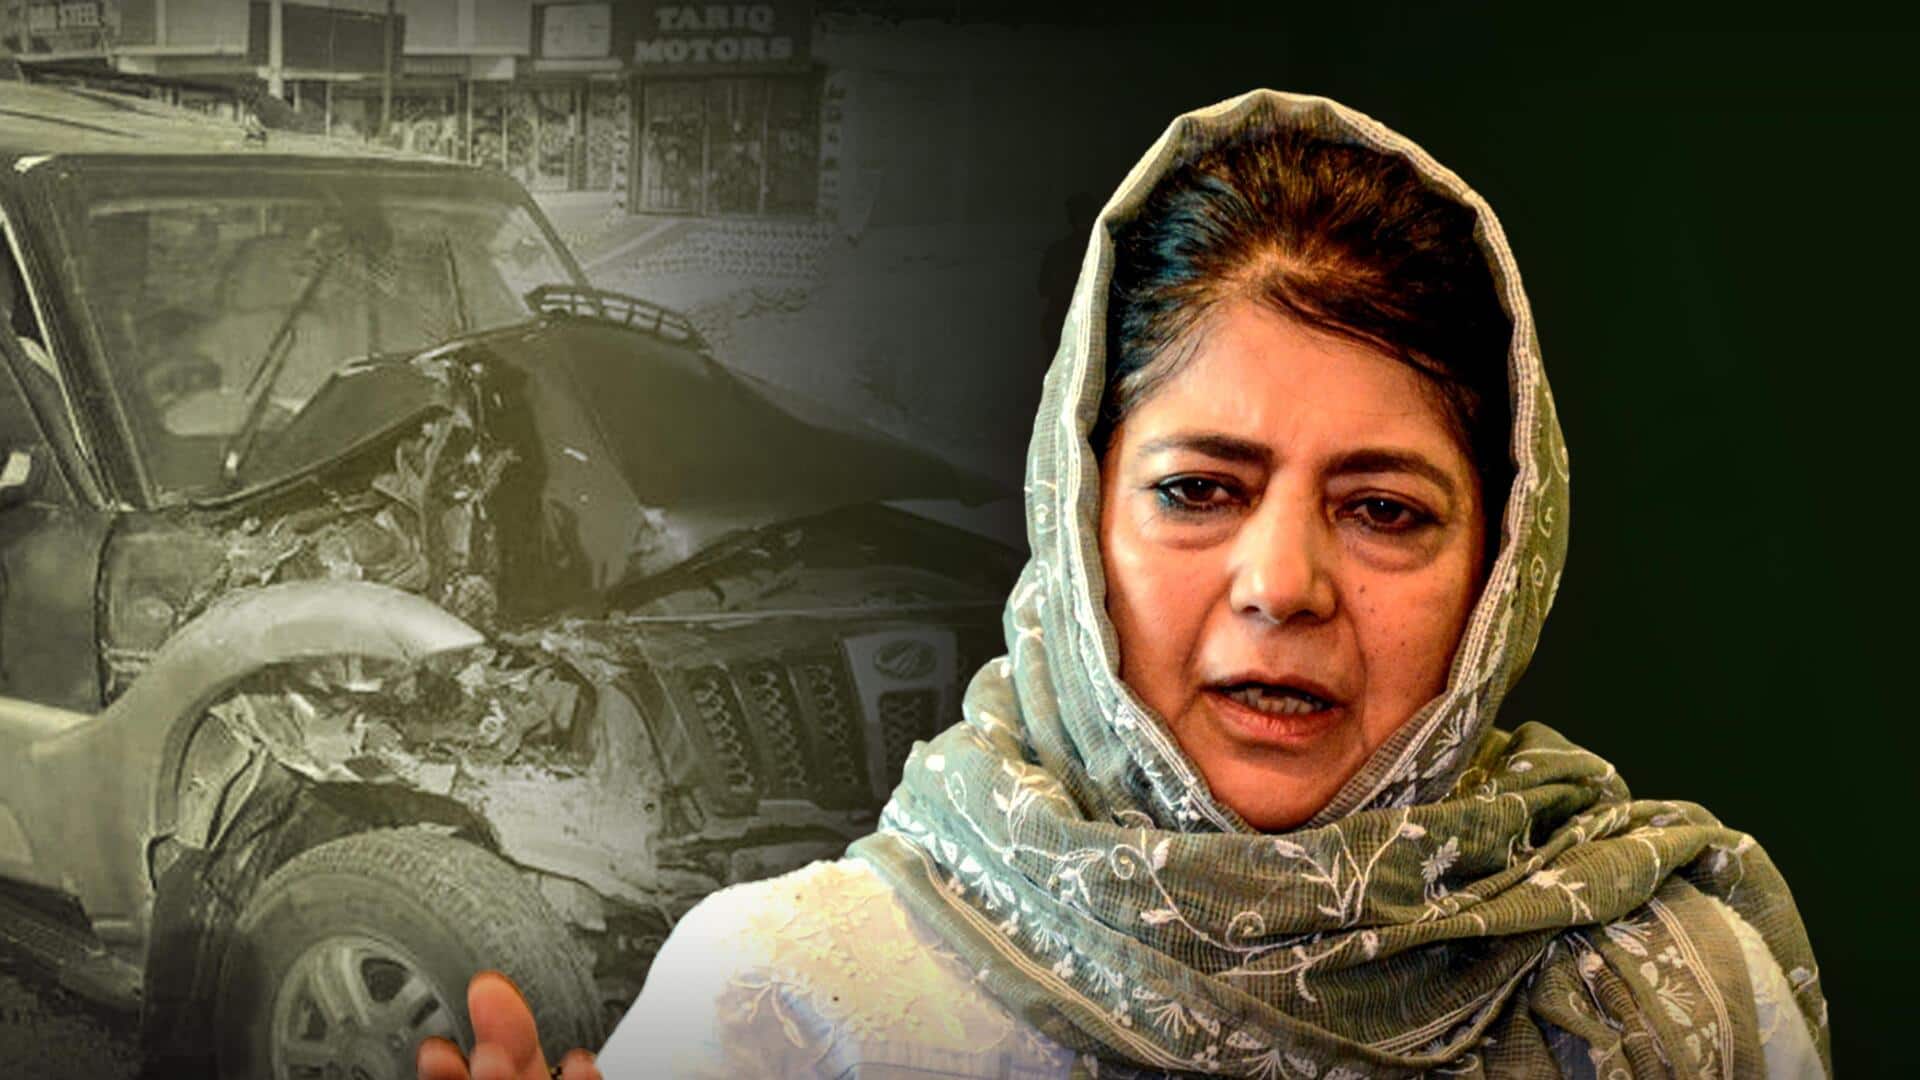 Narrow escape for Mehbooba Mufti in car accident